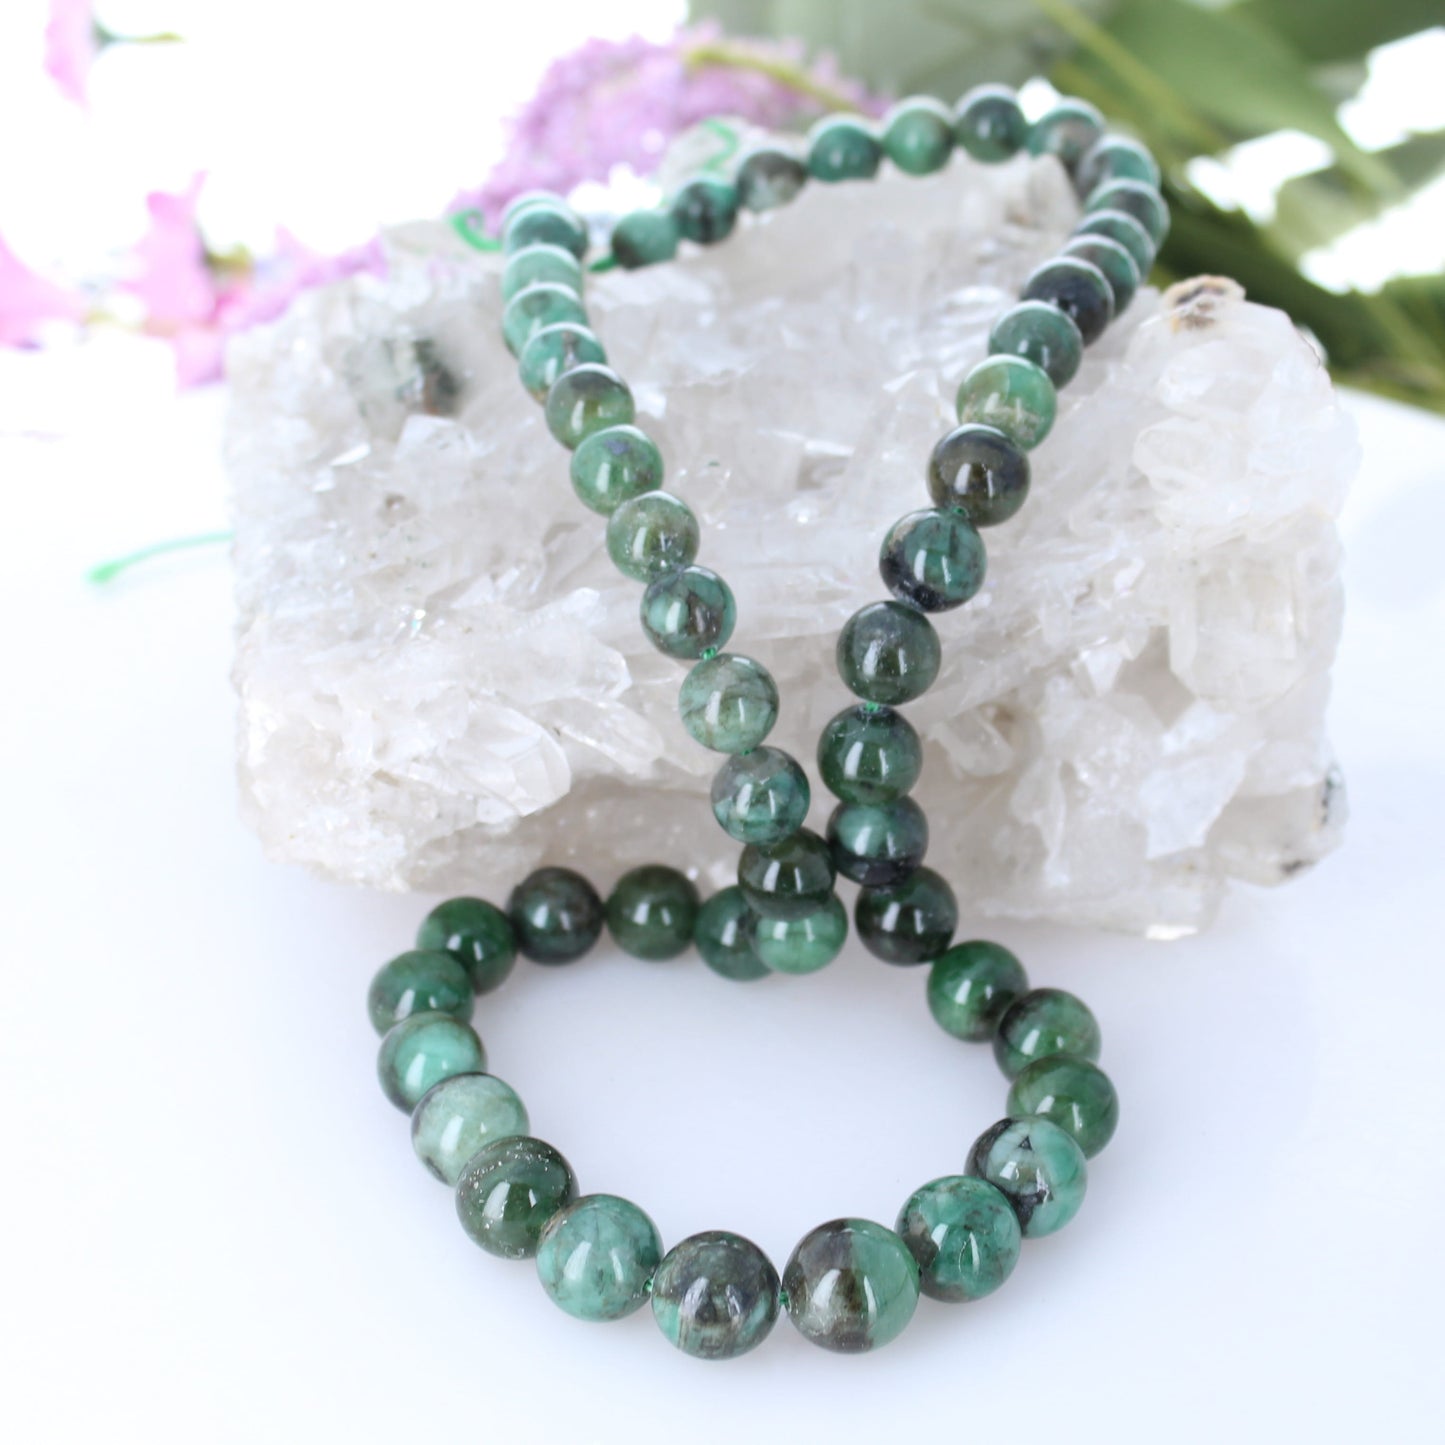 Genuine Emerald Beads Graduated Rounds Shaped 8 to 11mm 20"